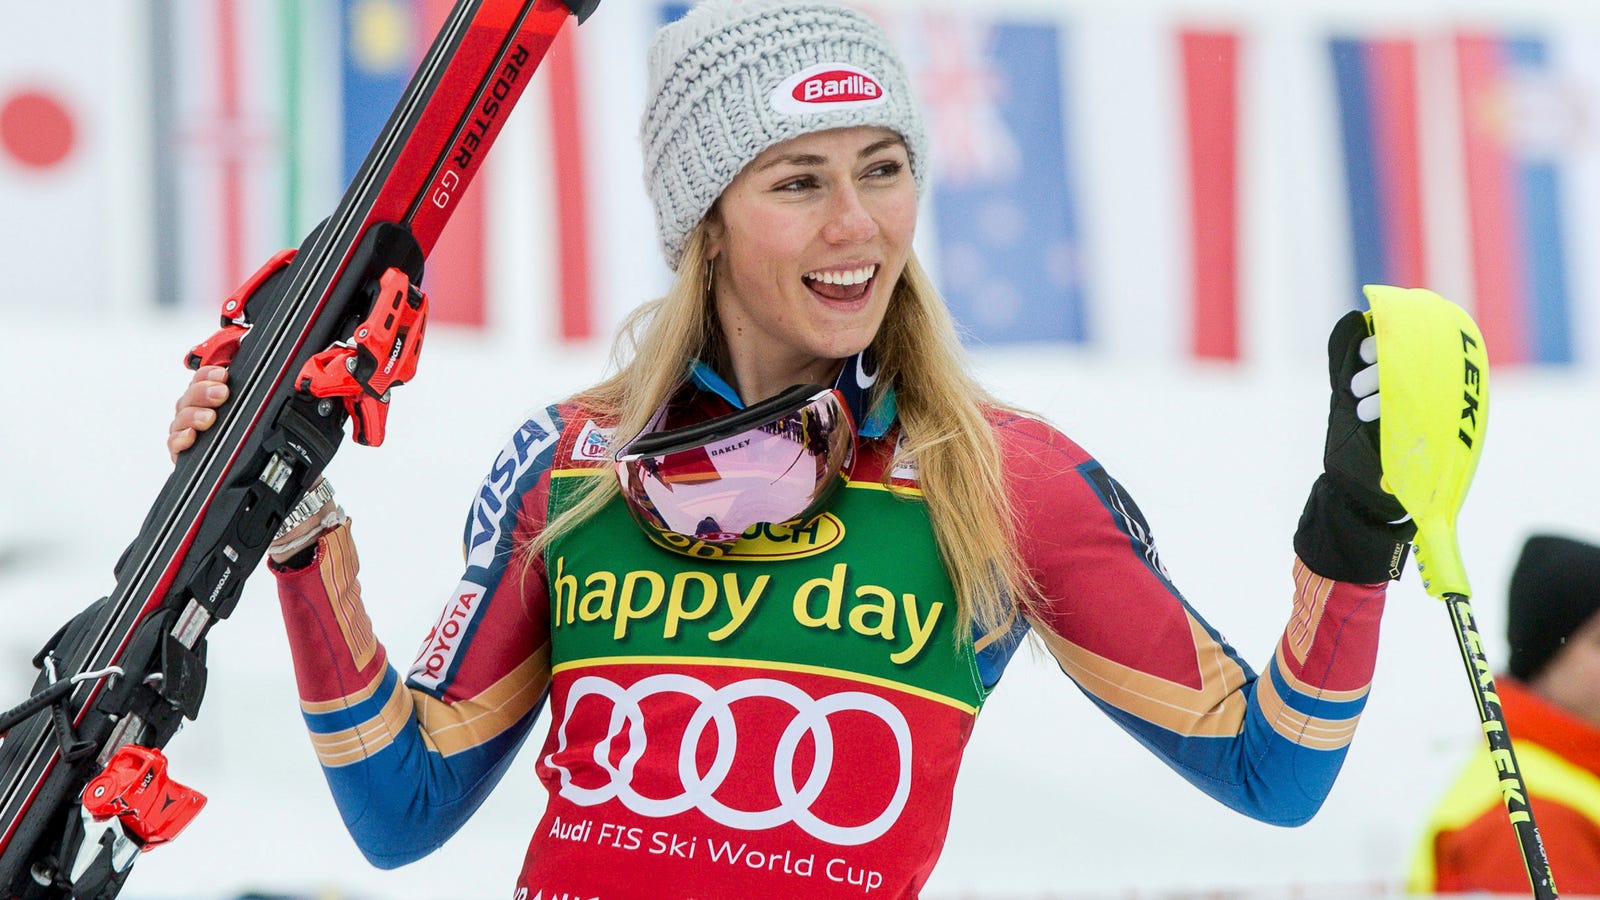 Everyone You Need To Know In Olympic Women's Ski Racing